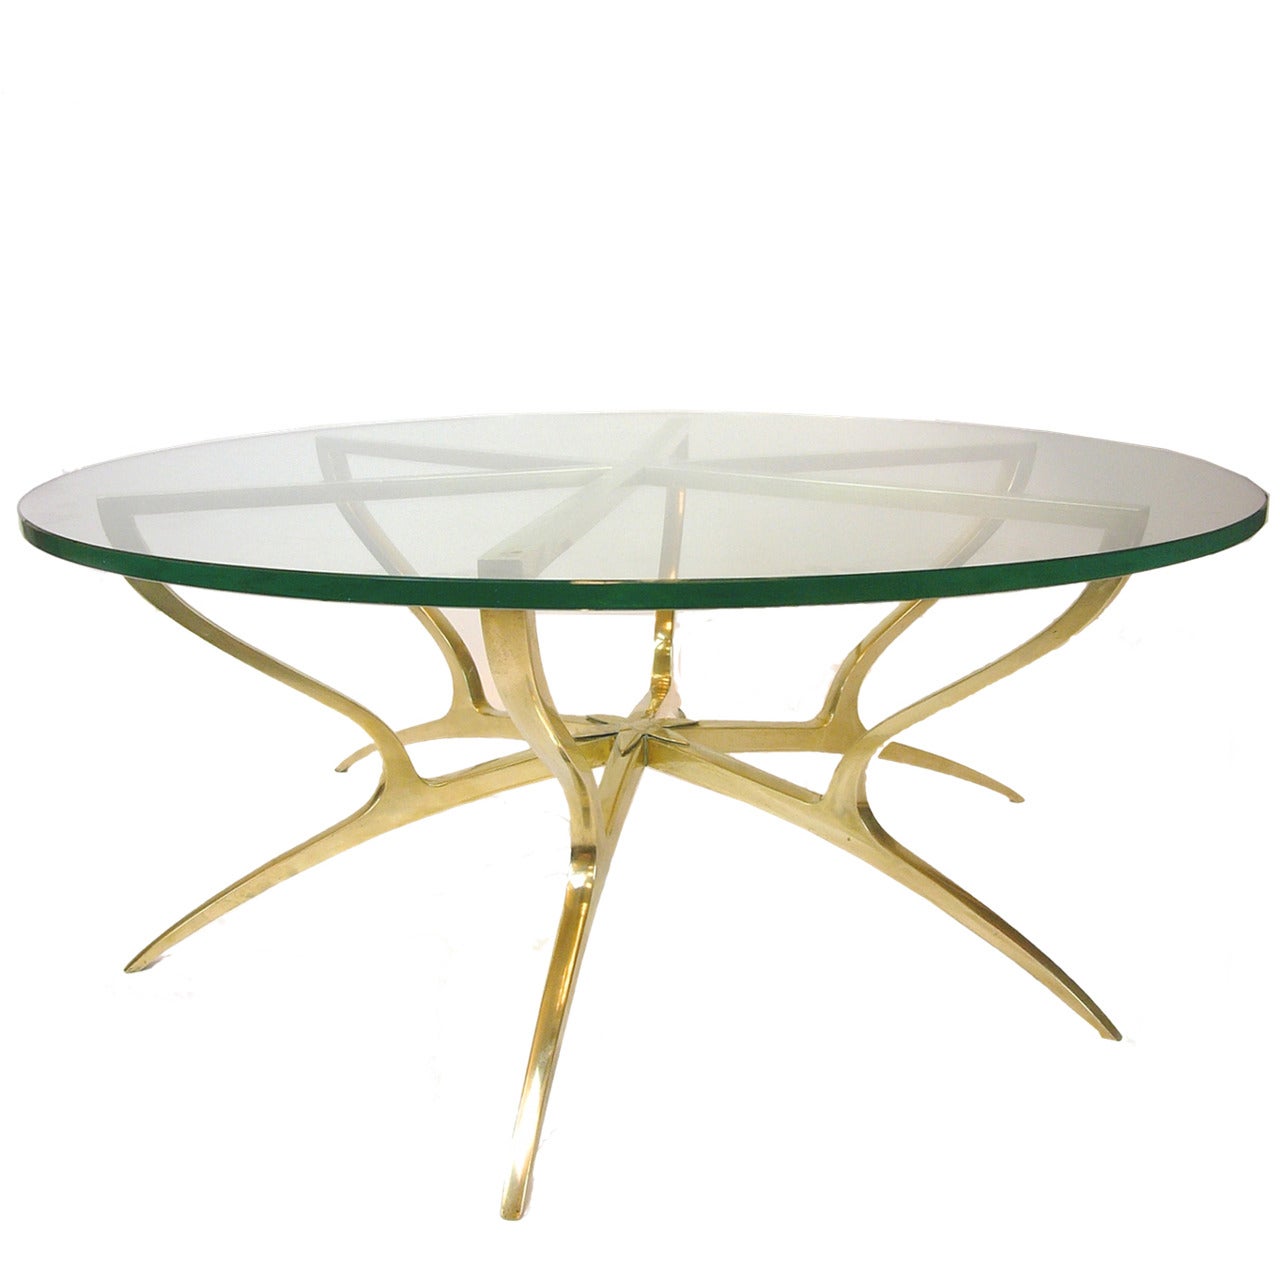 Heavy Solid Brass with Glass Italian Style Spider Legged Coffee Table